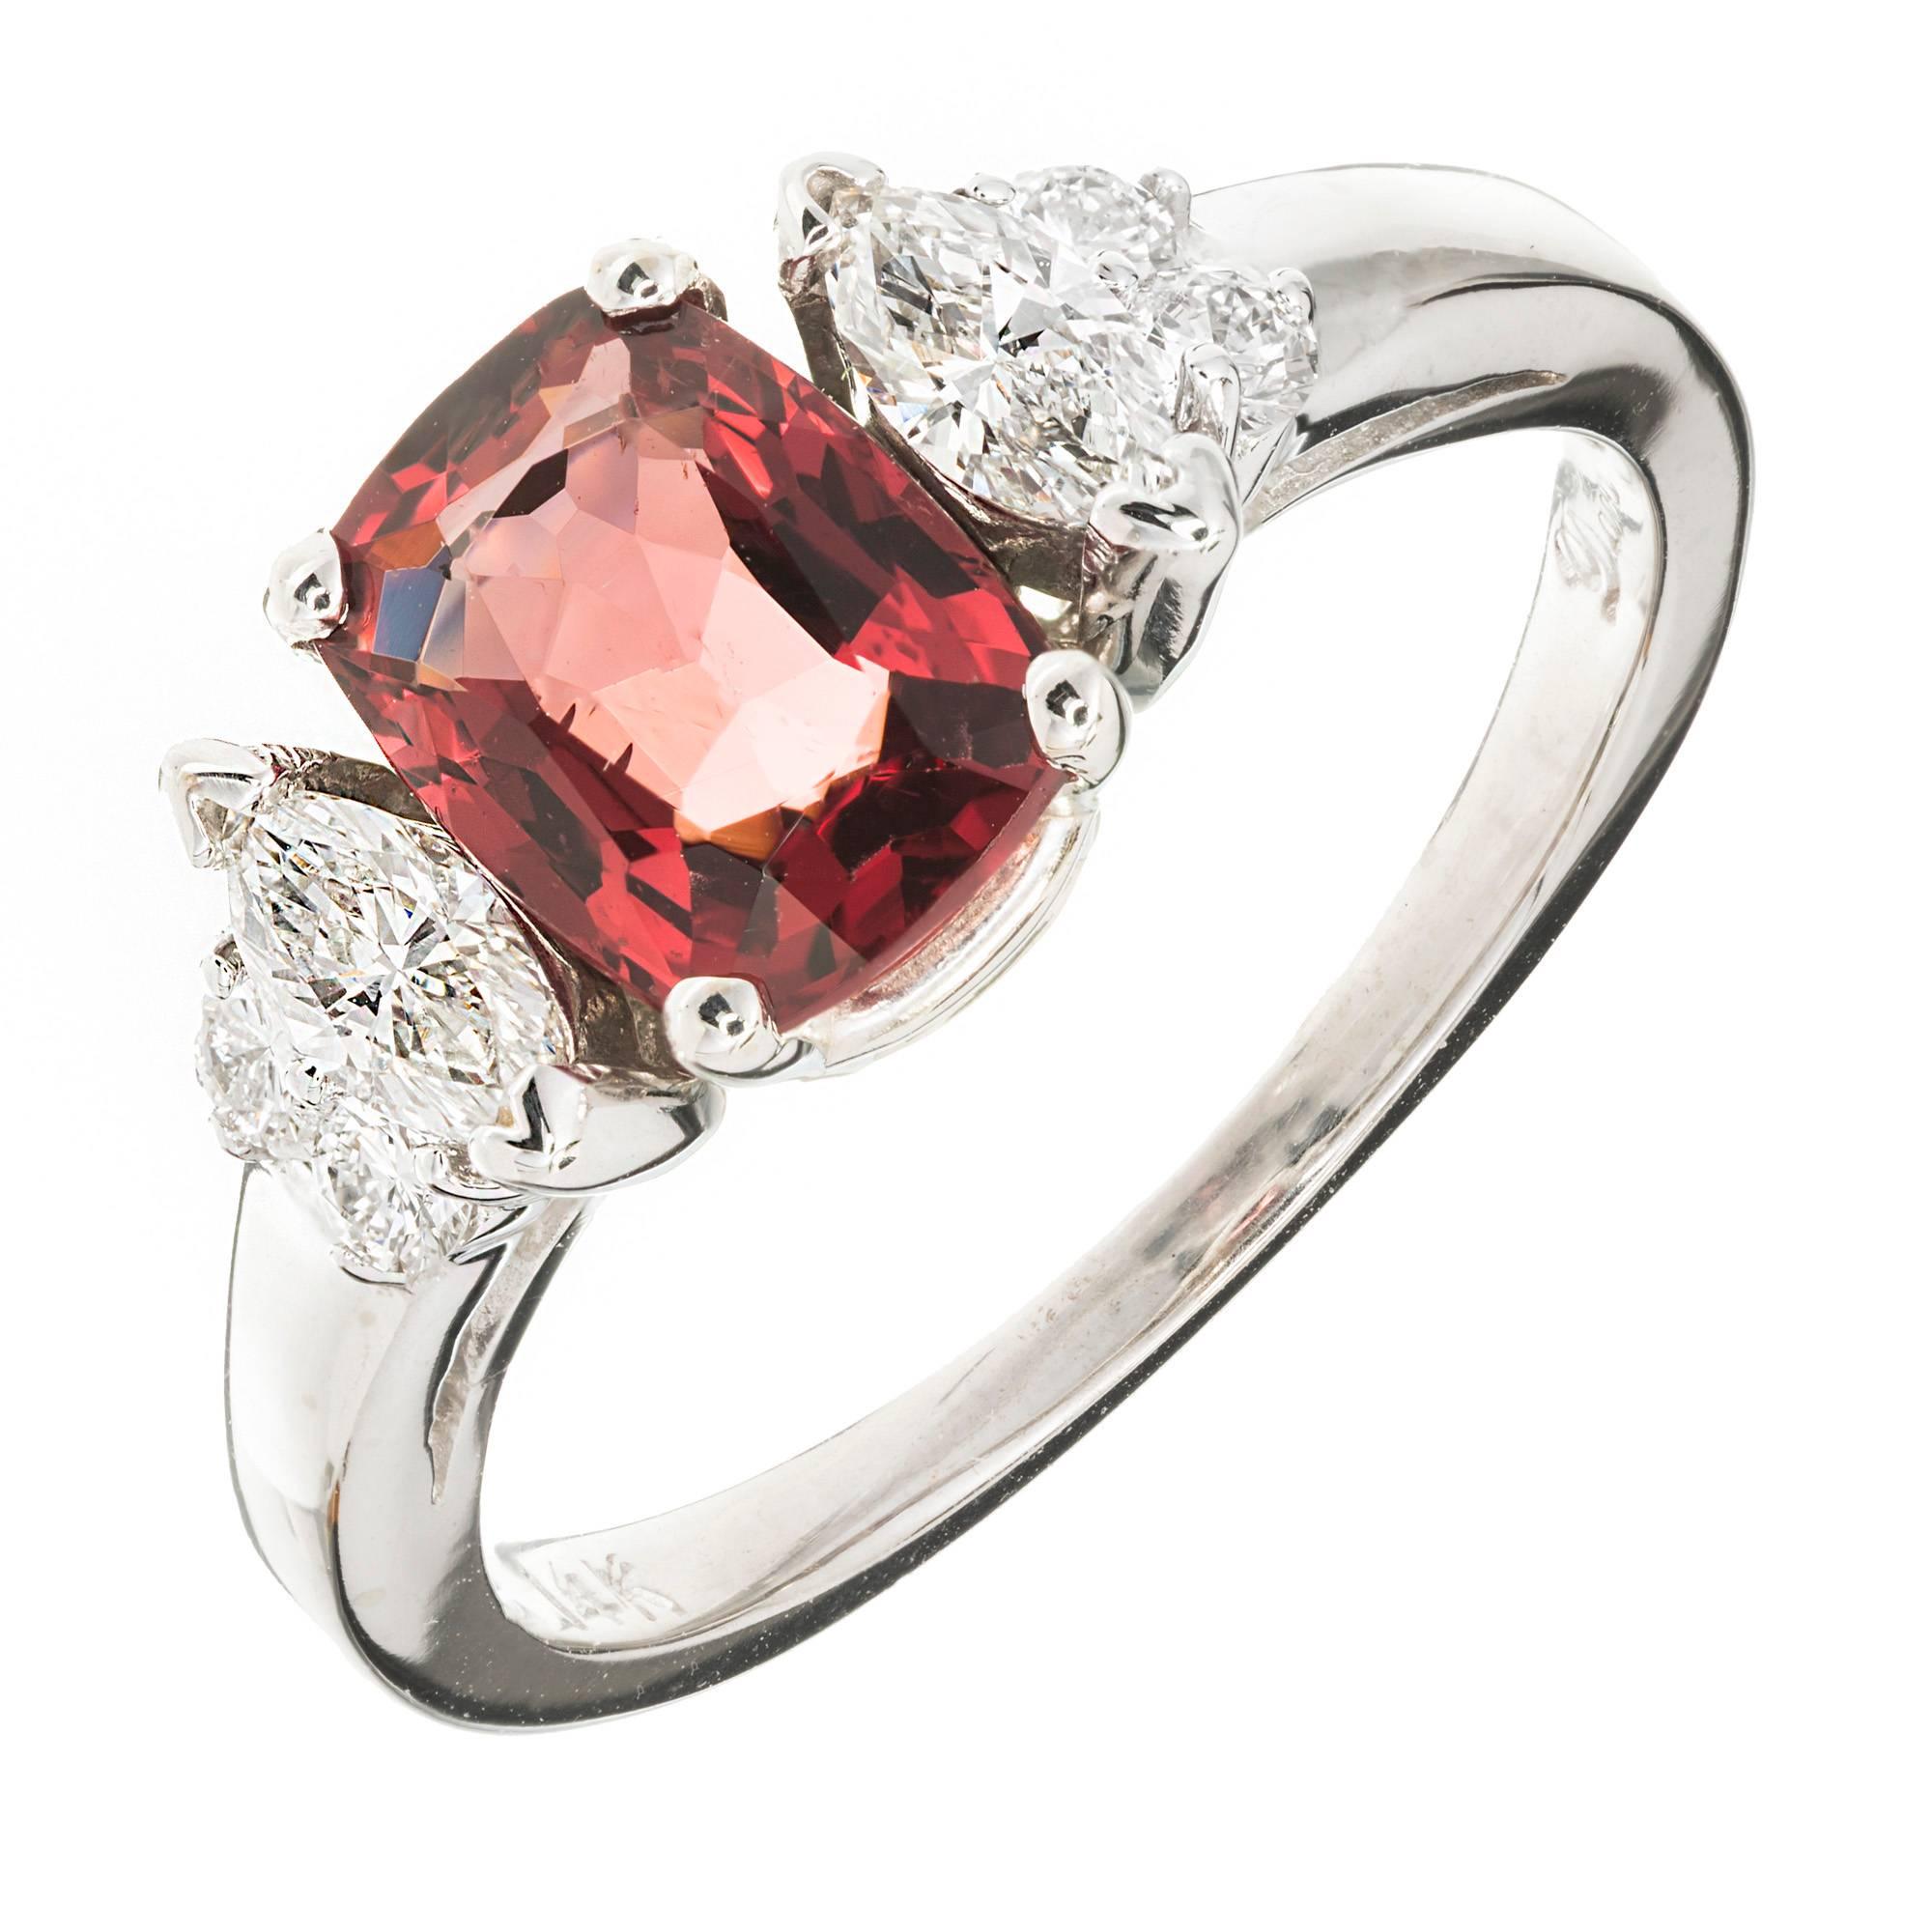 Designer Dana Bright orange red Spinel and diamond 14k white gold three-stone engagement ring. GIA certified. 

1 cushion cut orangey red Spinel, approx. total weight 1.39cts, VS, 4.72 x 3.52 x 1.90mm. GIA 2155137451
4 round full cut diamonds,